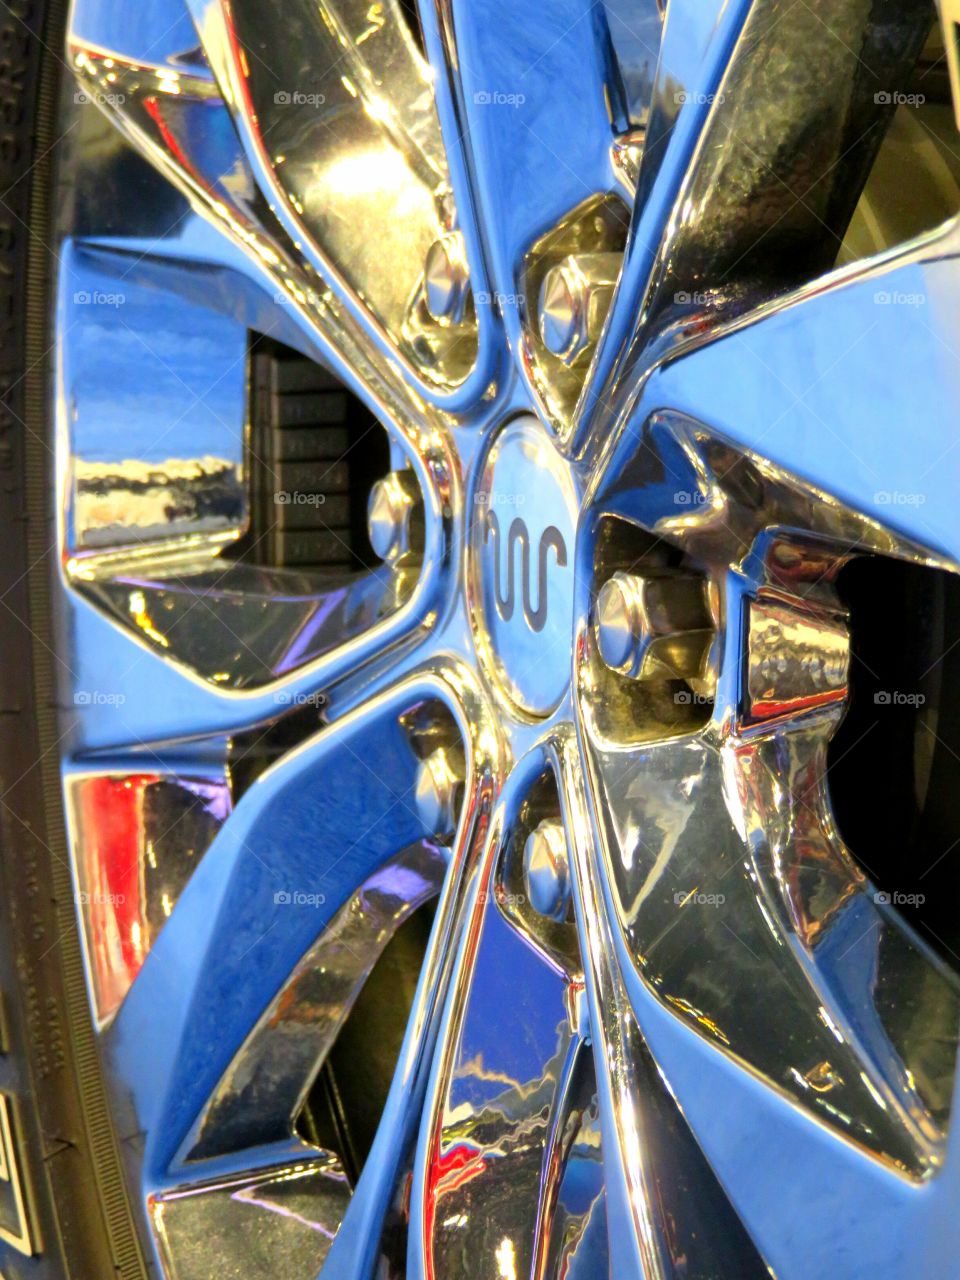 hubcap of a vehicle